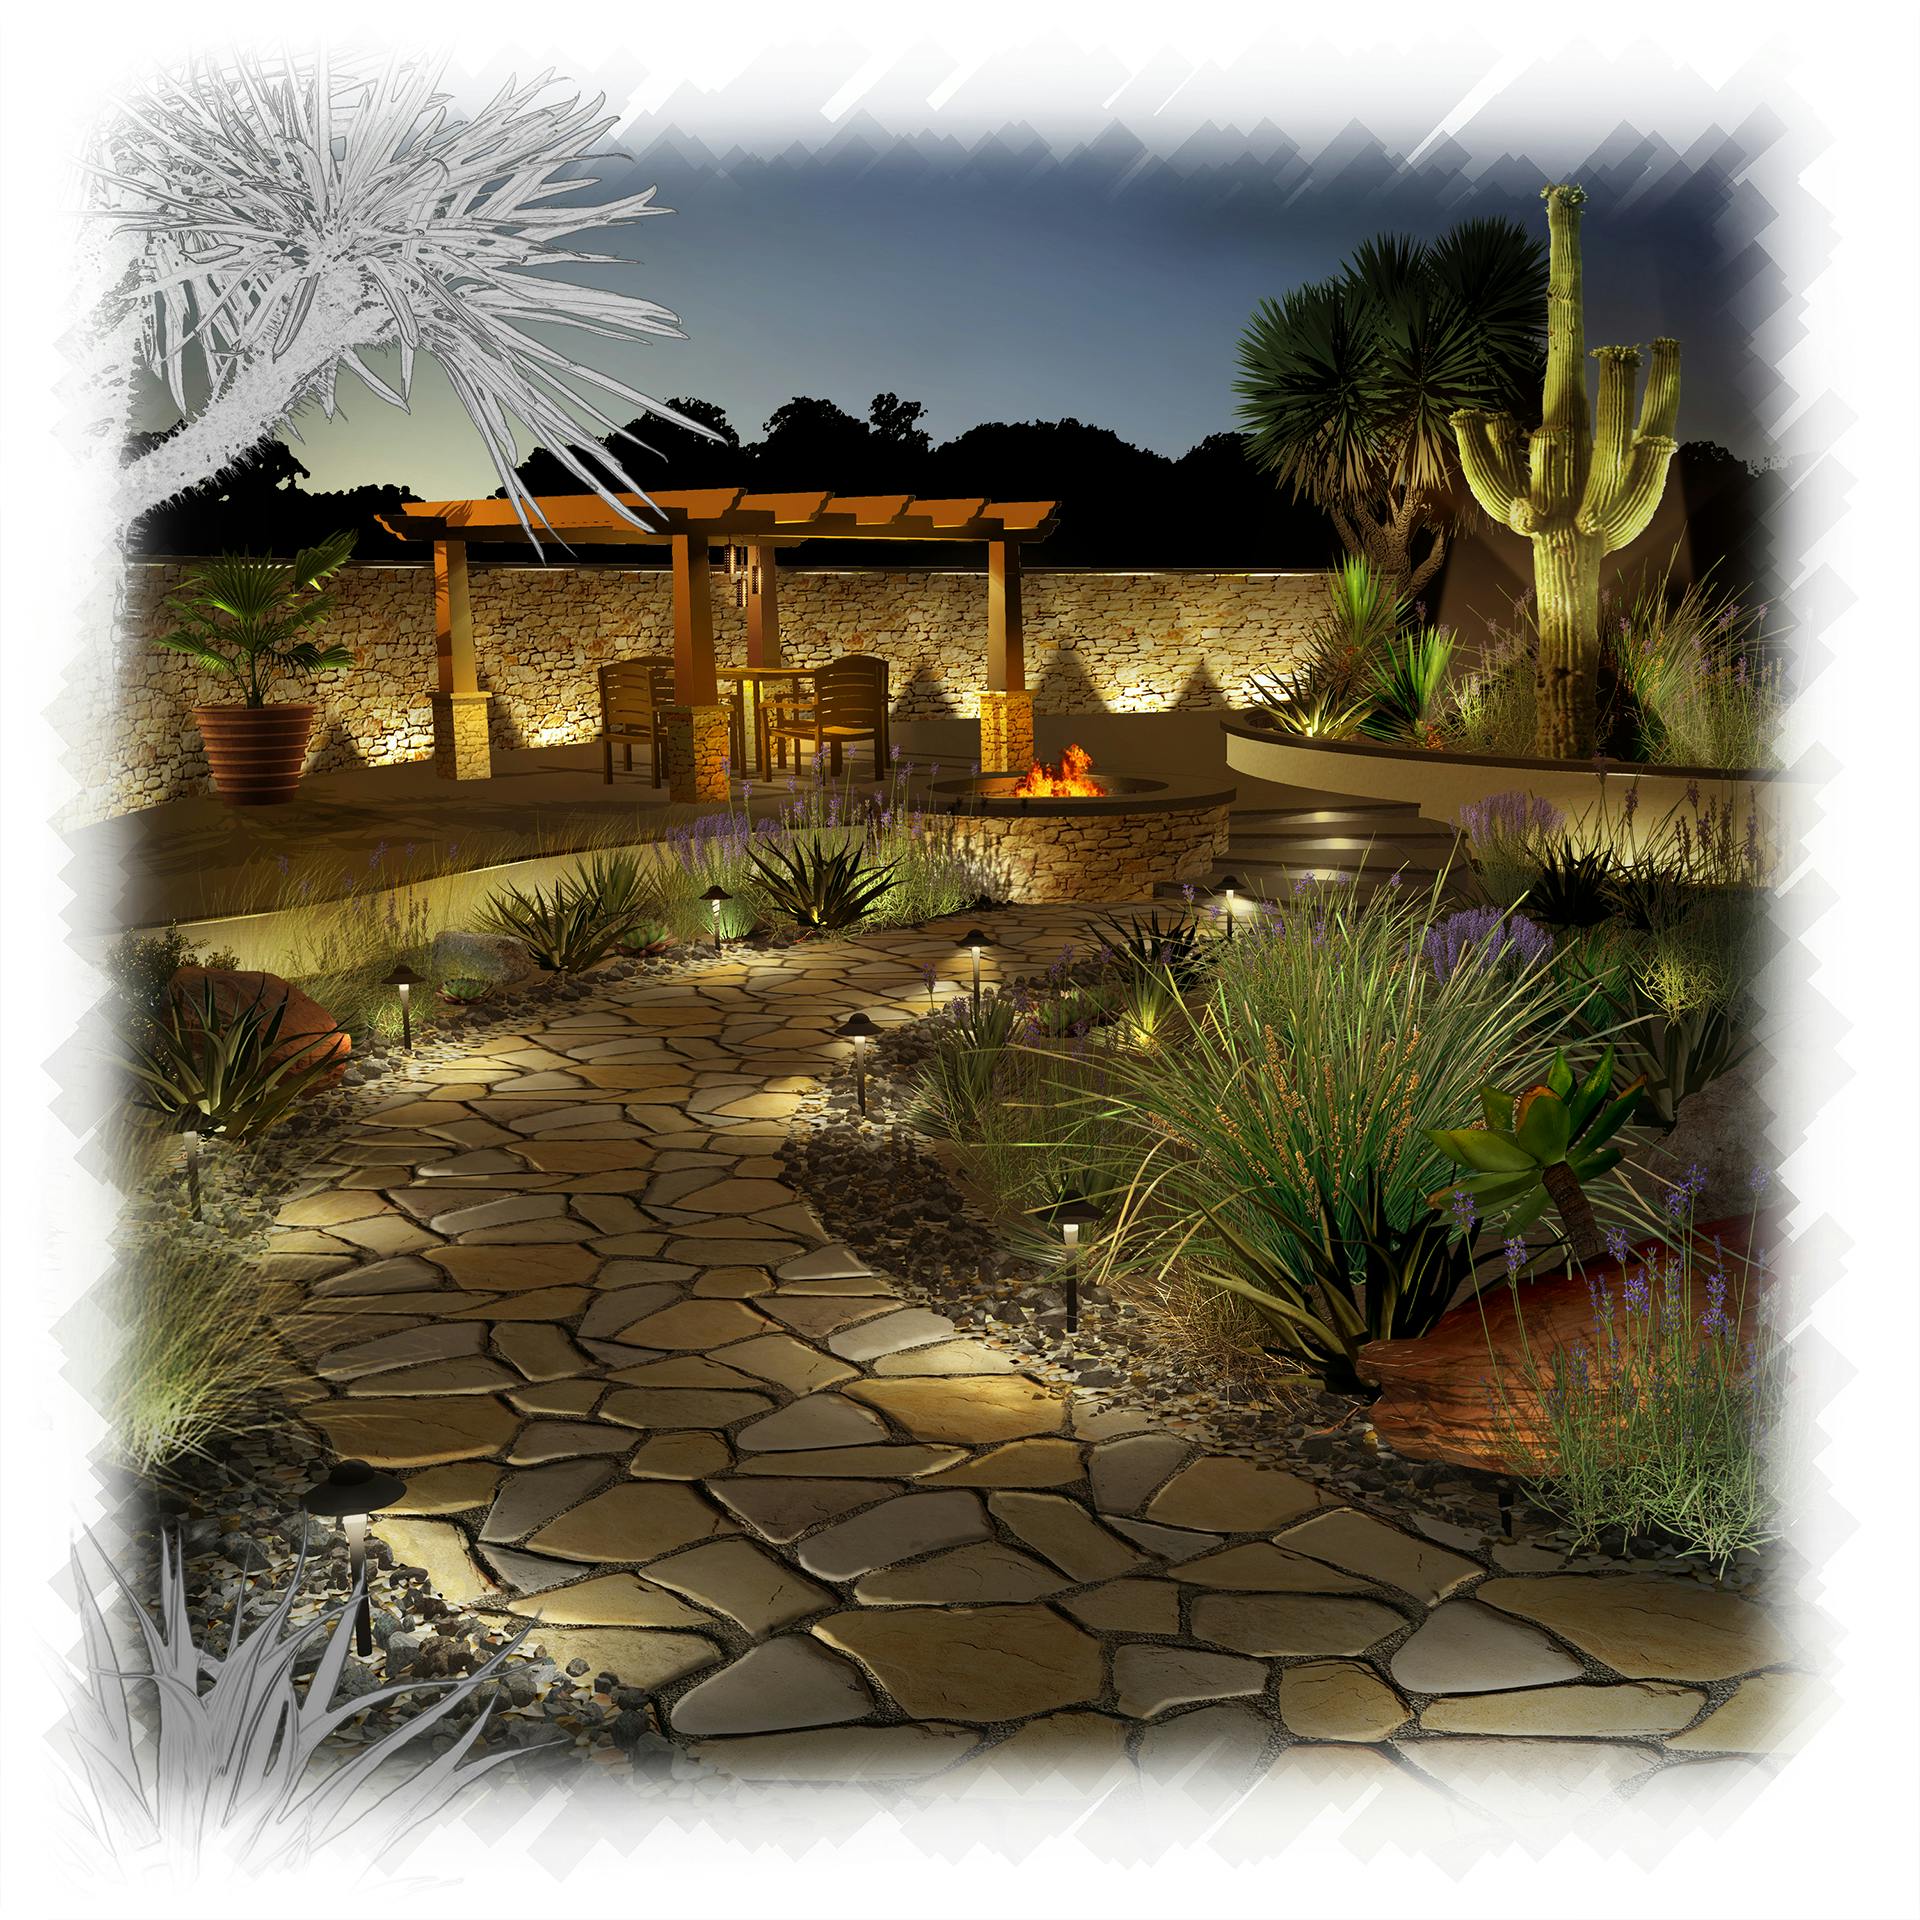 Illustration of a desert backyard garden with lit path at night